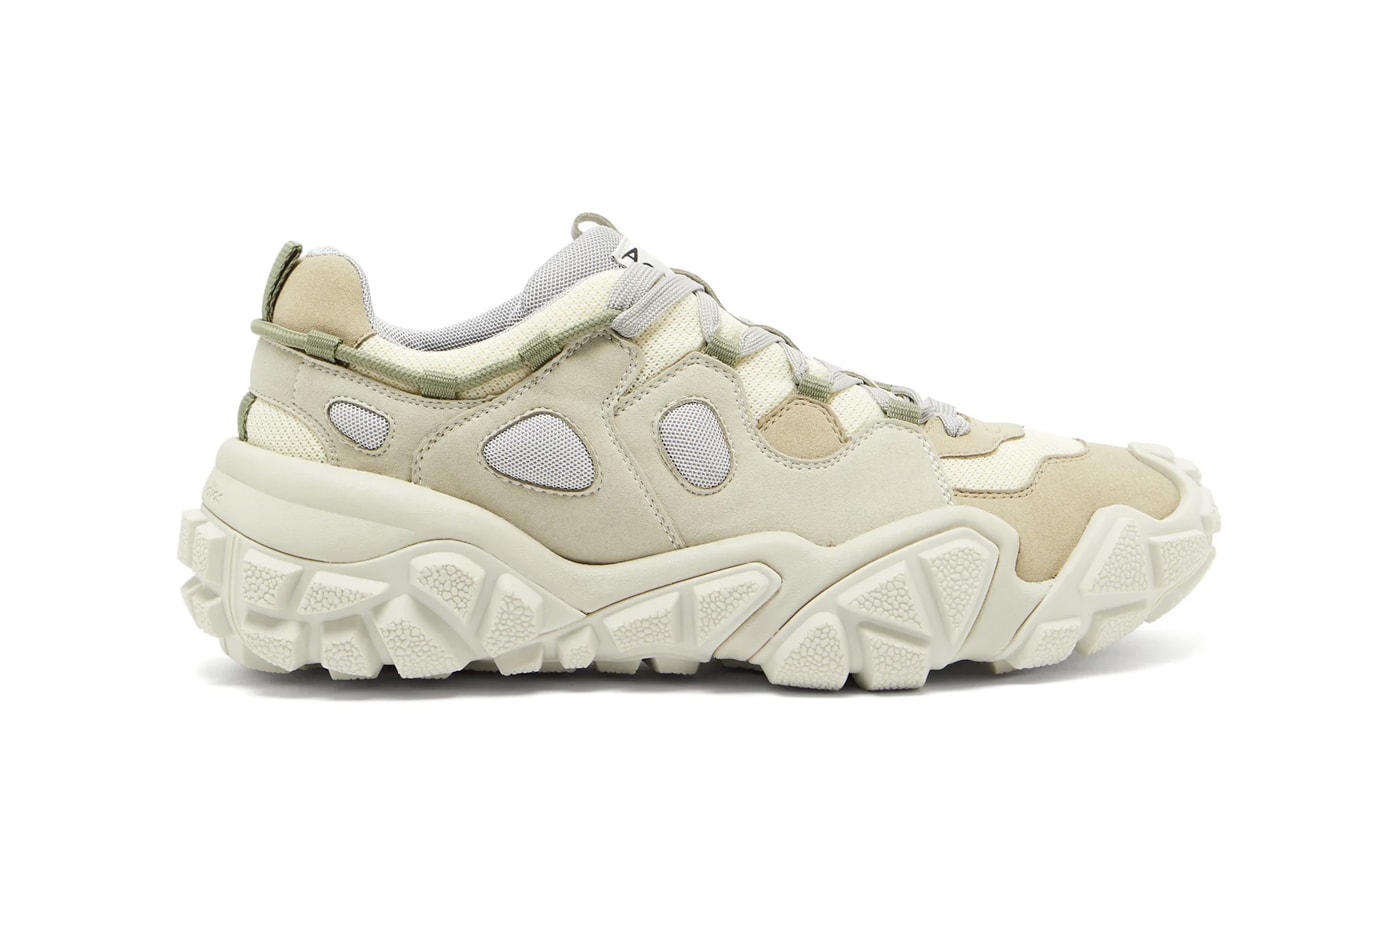 Acne Studios Chunky-Sole Suede & Mesh Low Top Trainers sneakers silhouette matchesfashion release info price drop details 